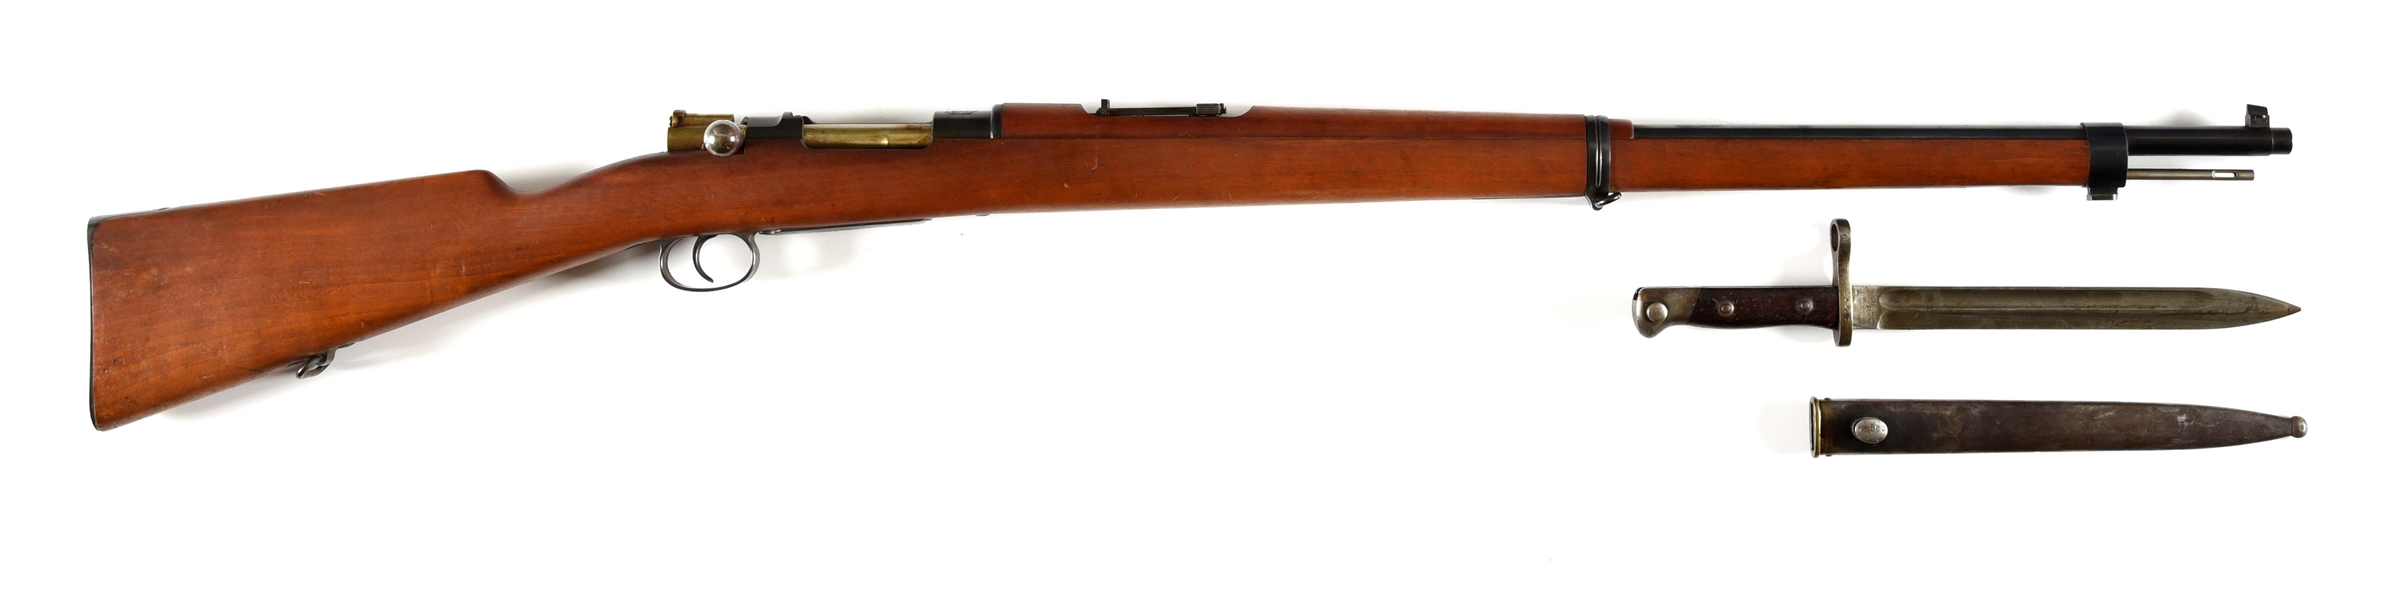 (A) CHILEAN MODEL 1895 MAUSER BOLT ACTION RIFLE MADE BY LOEWE.